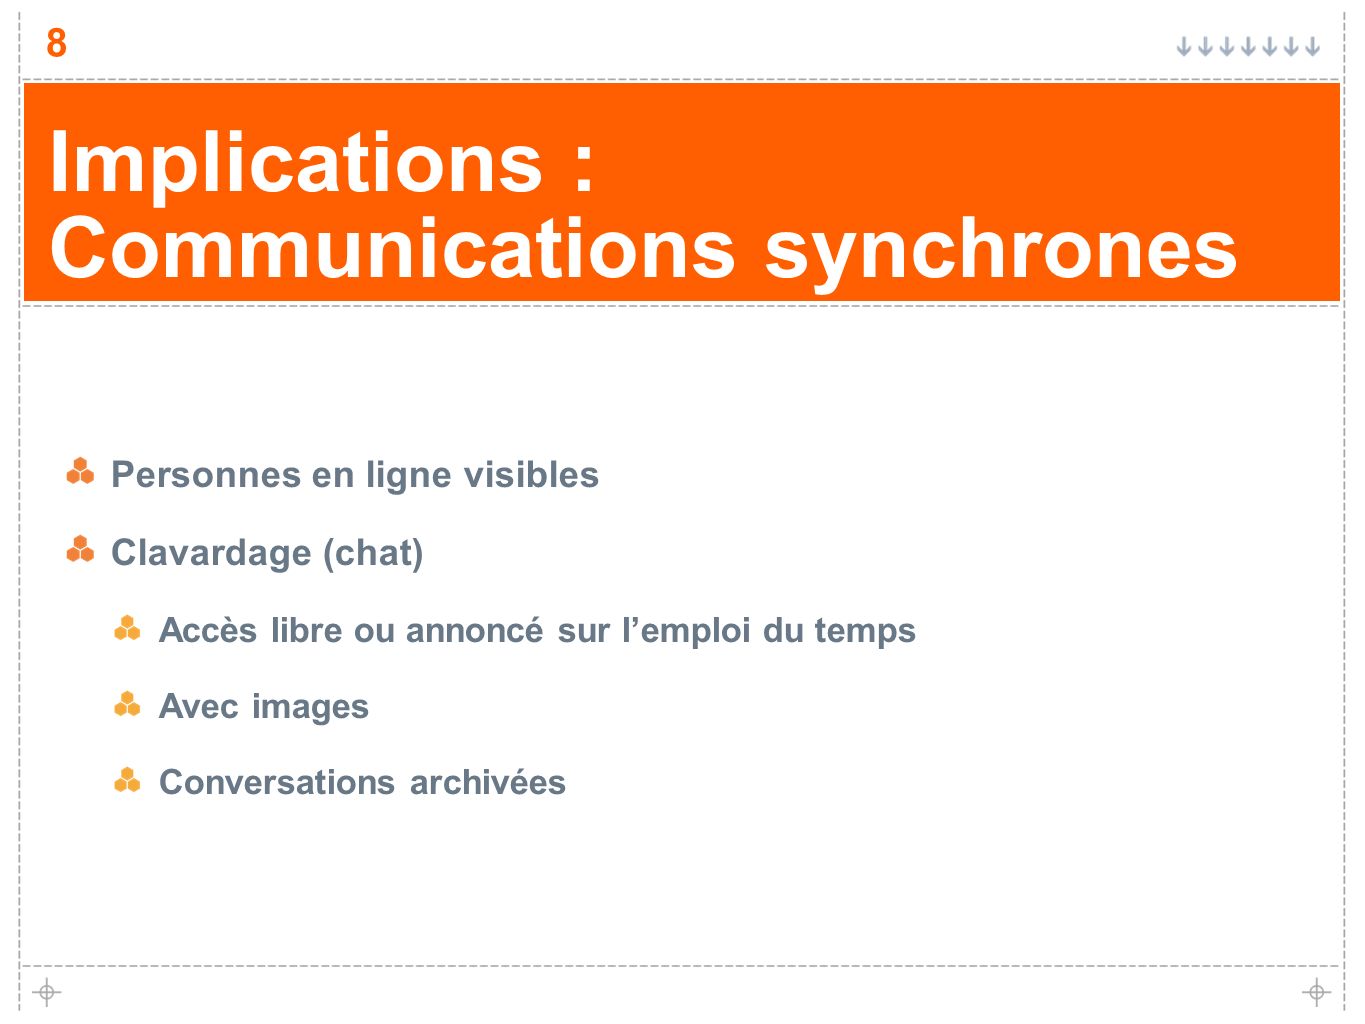 Implications : Communications synchrones